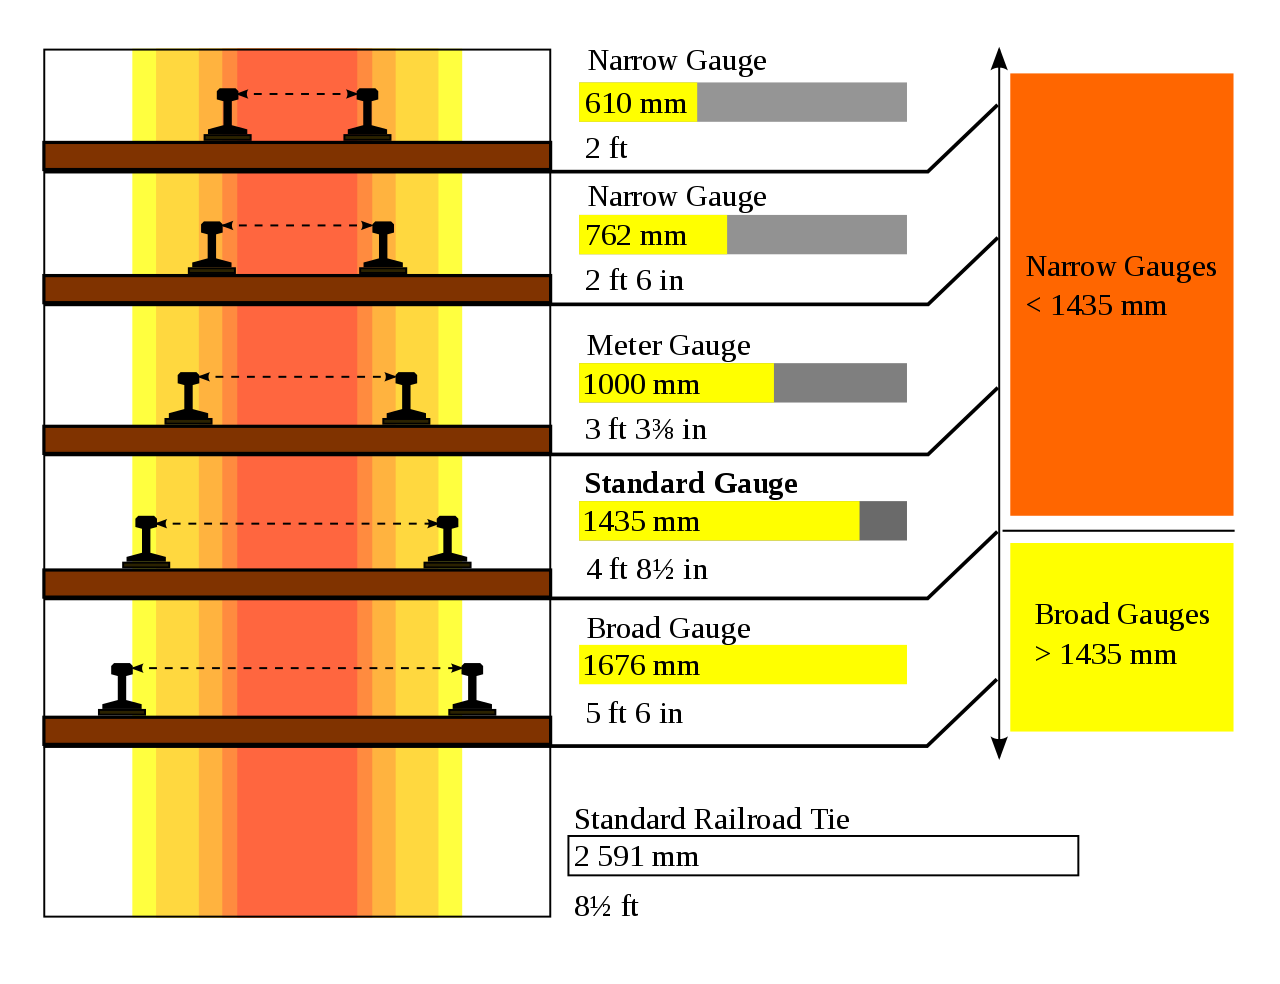 Different railway gauges common in India in comparison to standard gauge, illustration made for Project Uni-Gauge